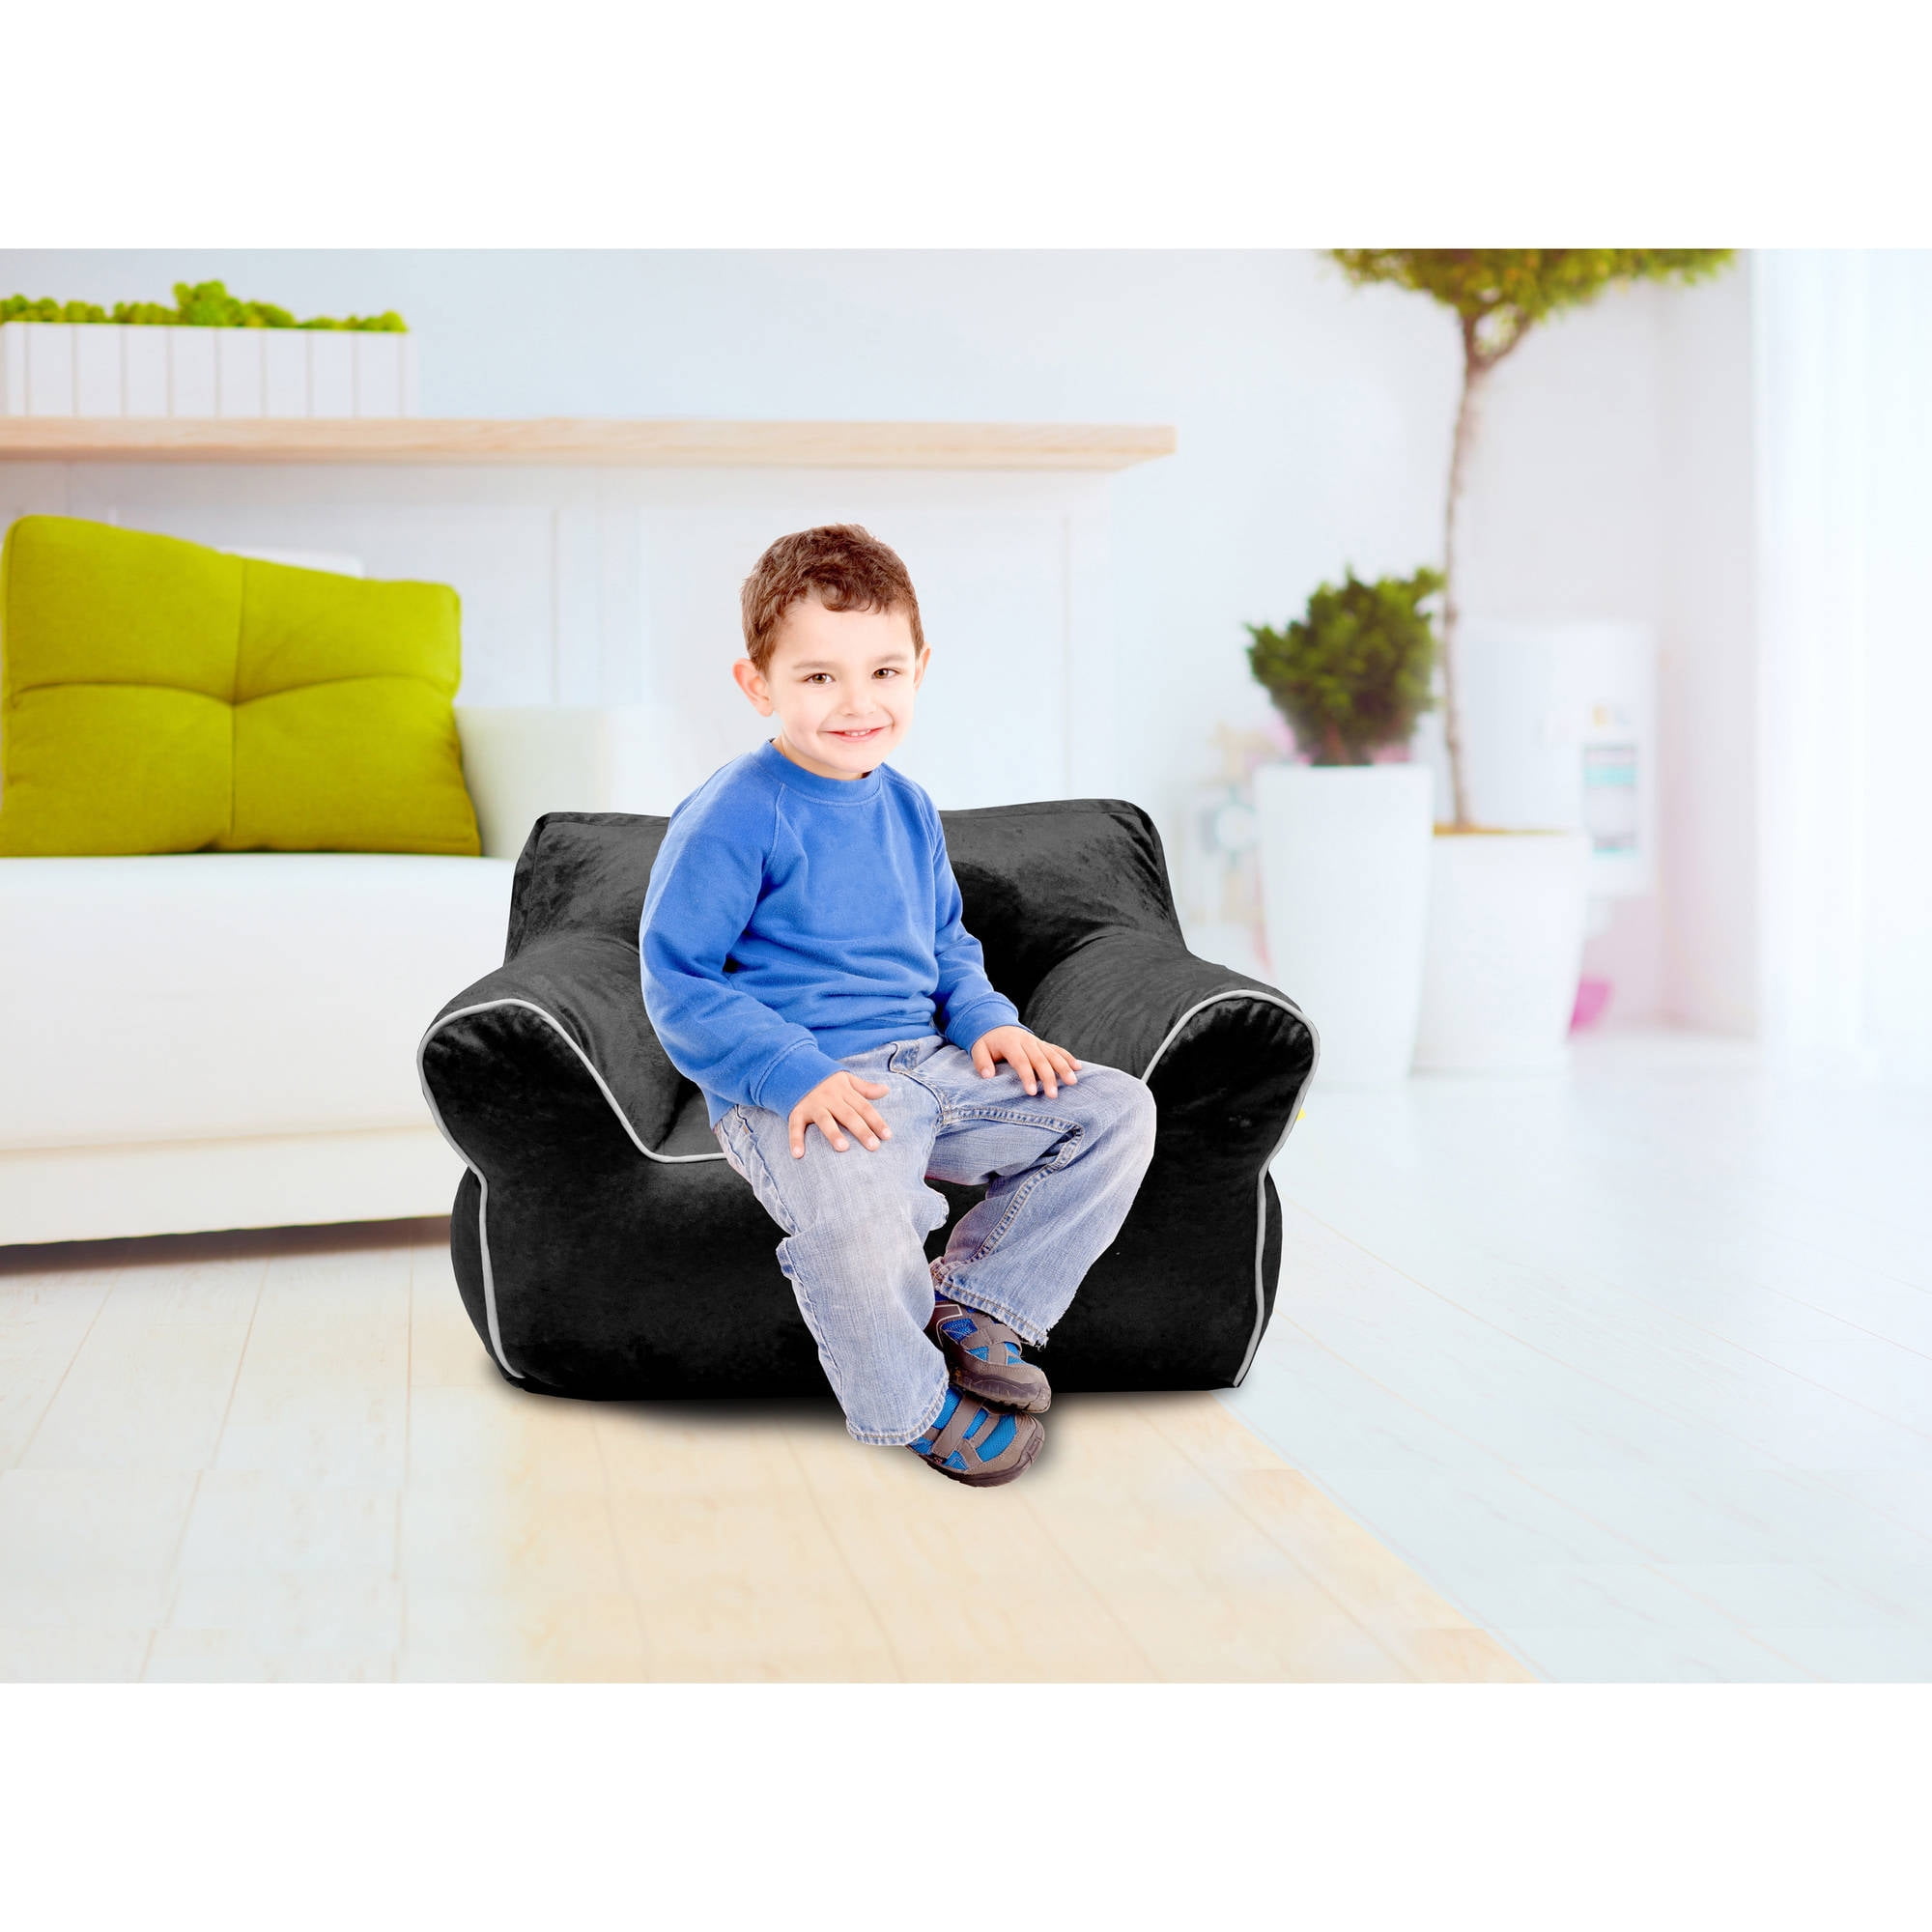 Snuggly Animal Seat Makes a Great Holiday Gift for Kids FlipaZoo 2 in1 Plush Toddler Chair Transforms from Brown Dog to White Cat